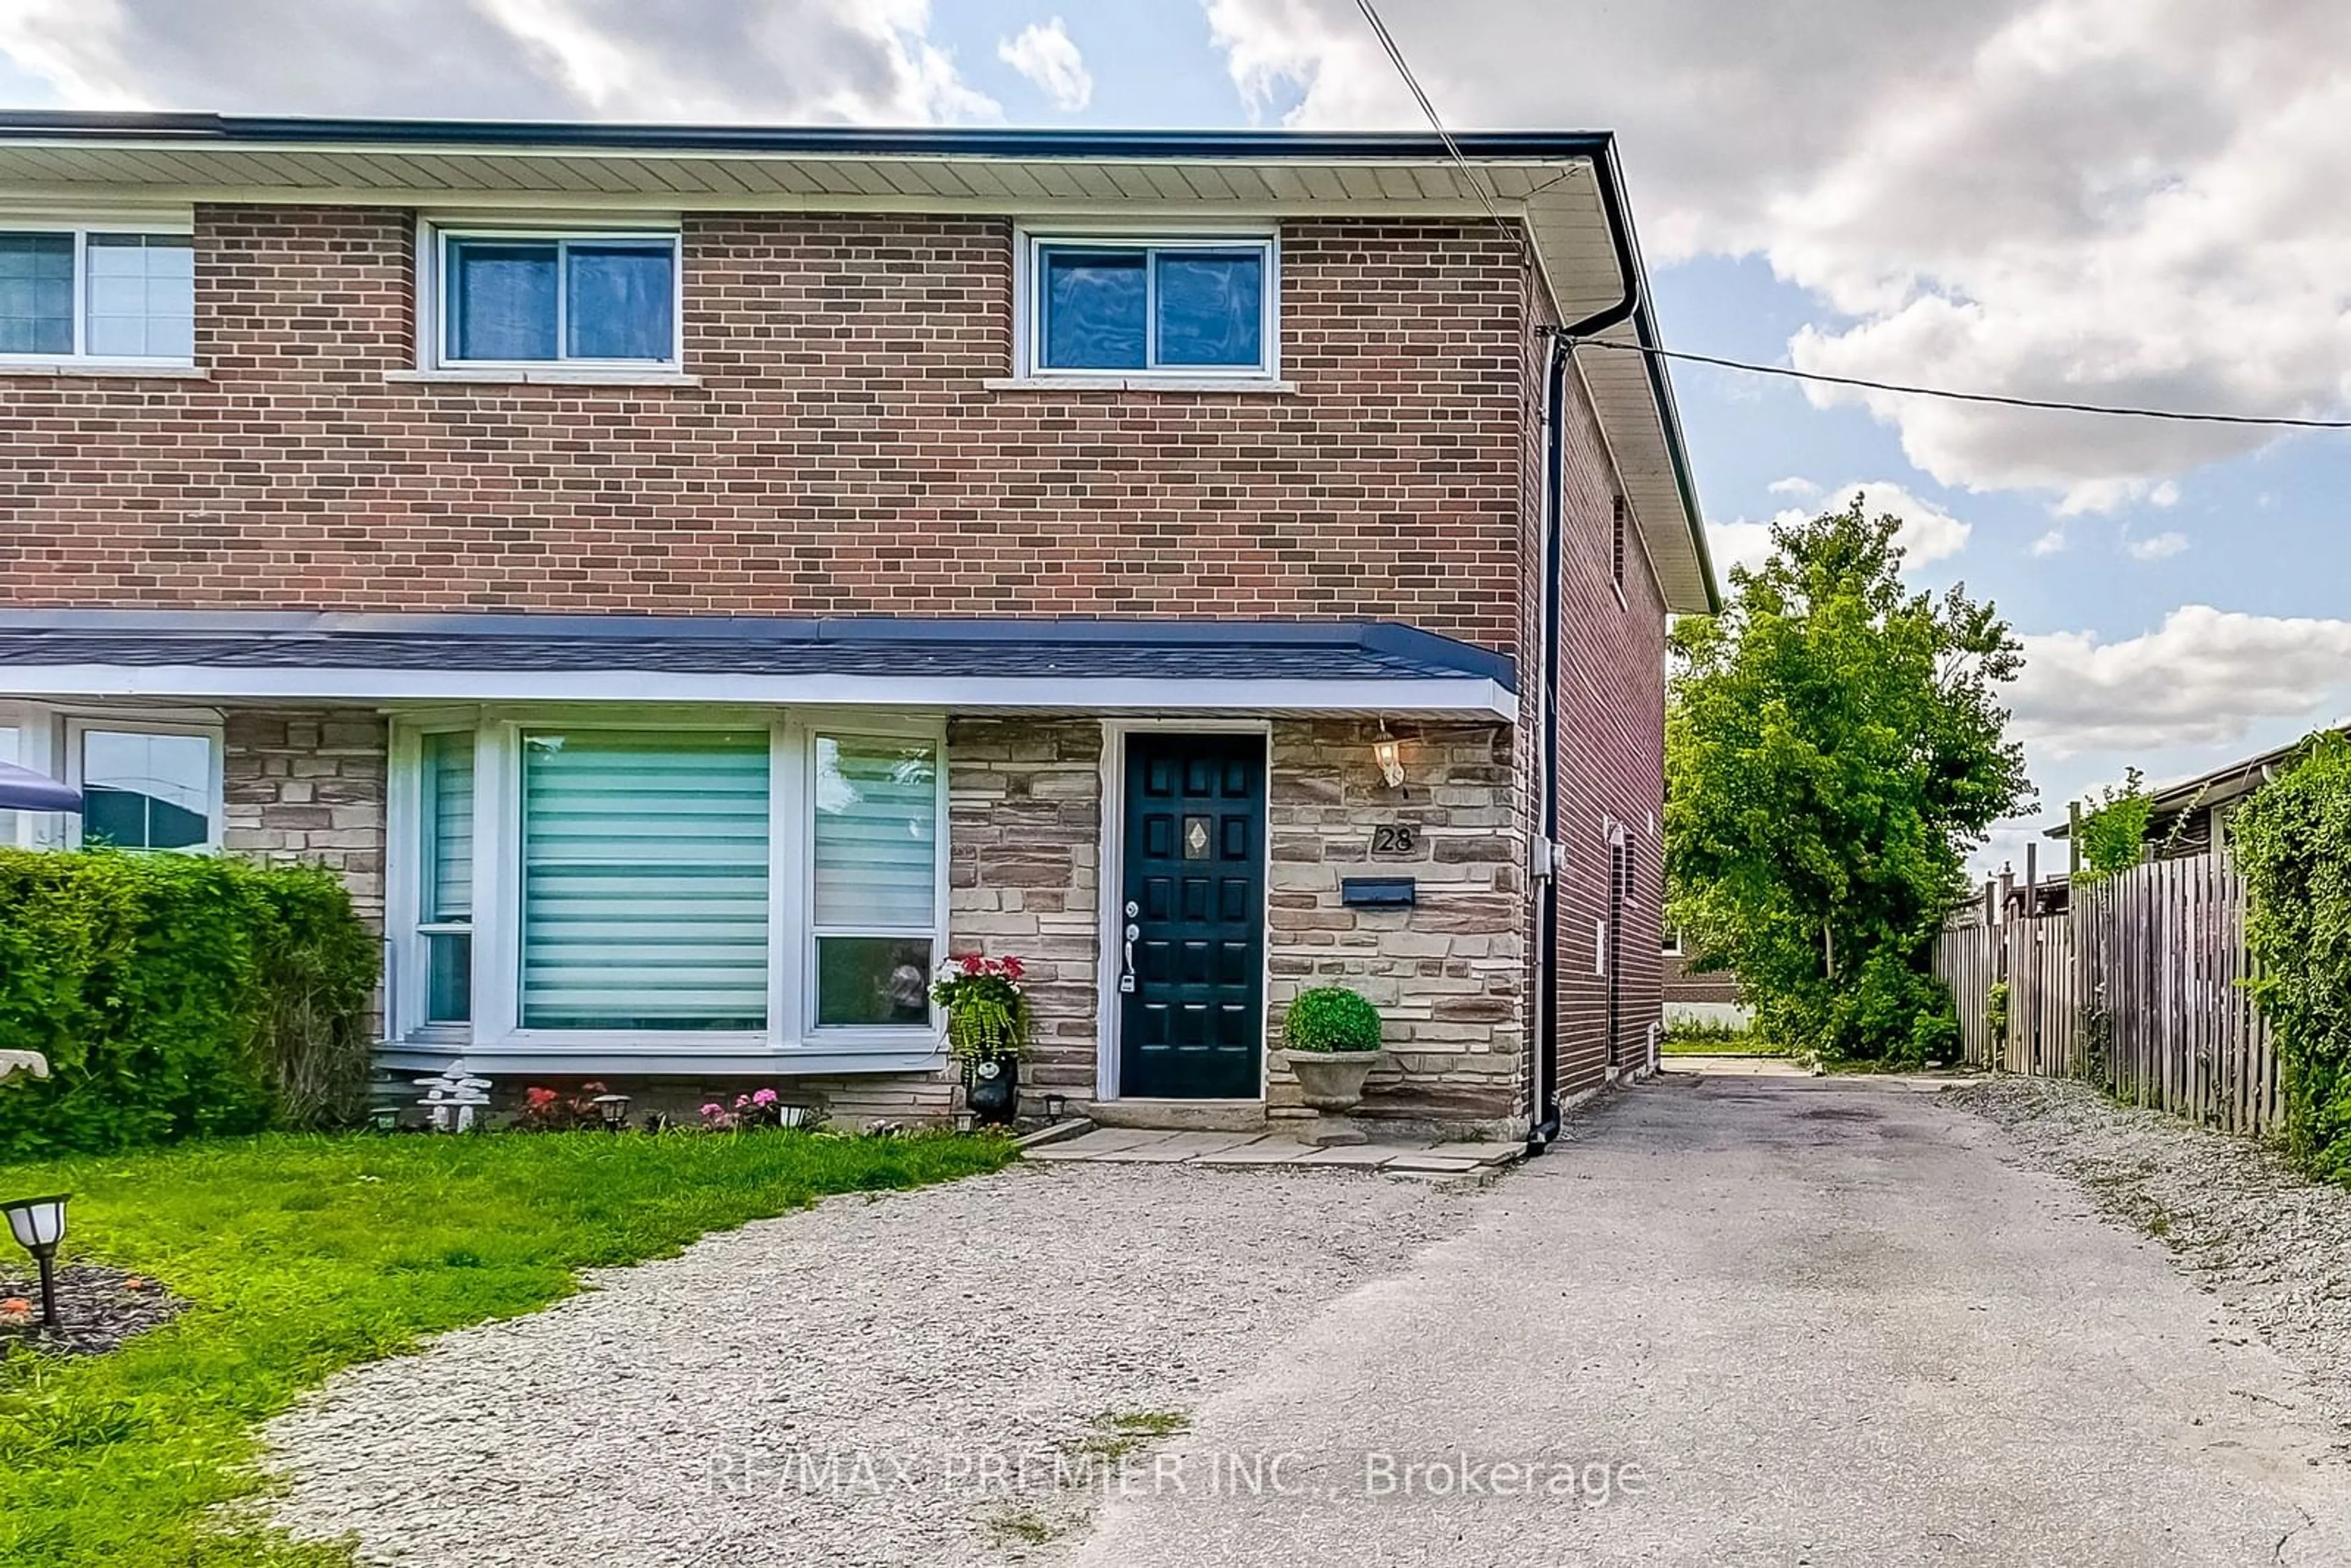 Home with brick exterior material for 28 Navenby Cres, Toronto Ontario M9L 1B2